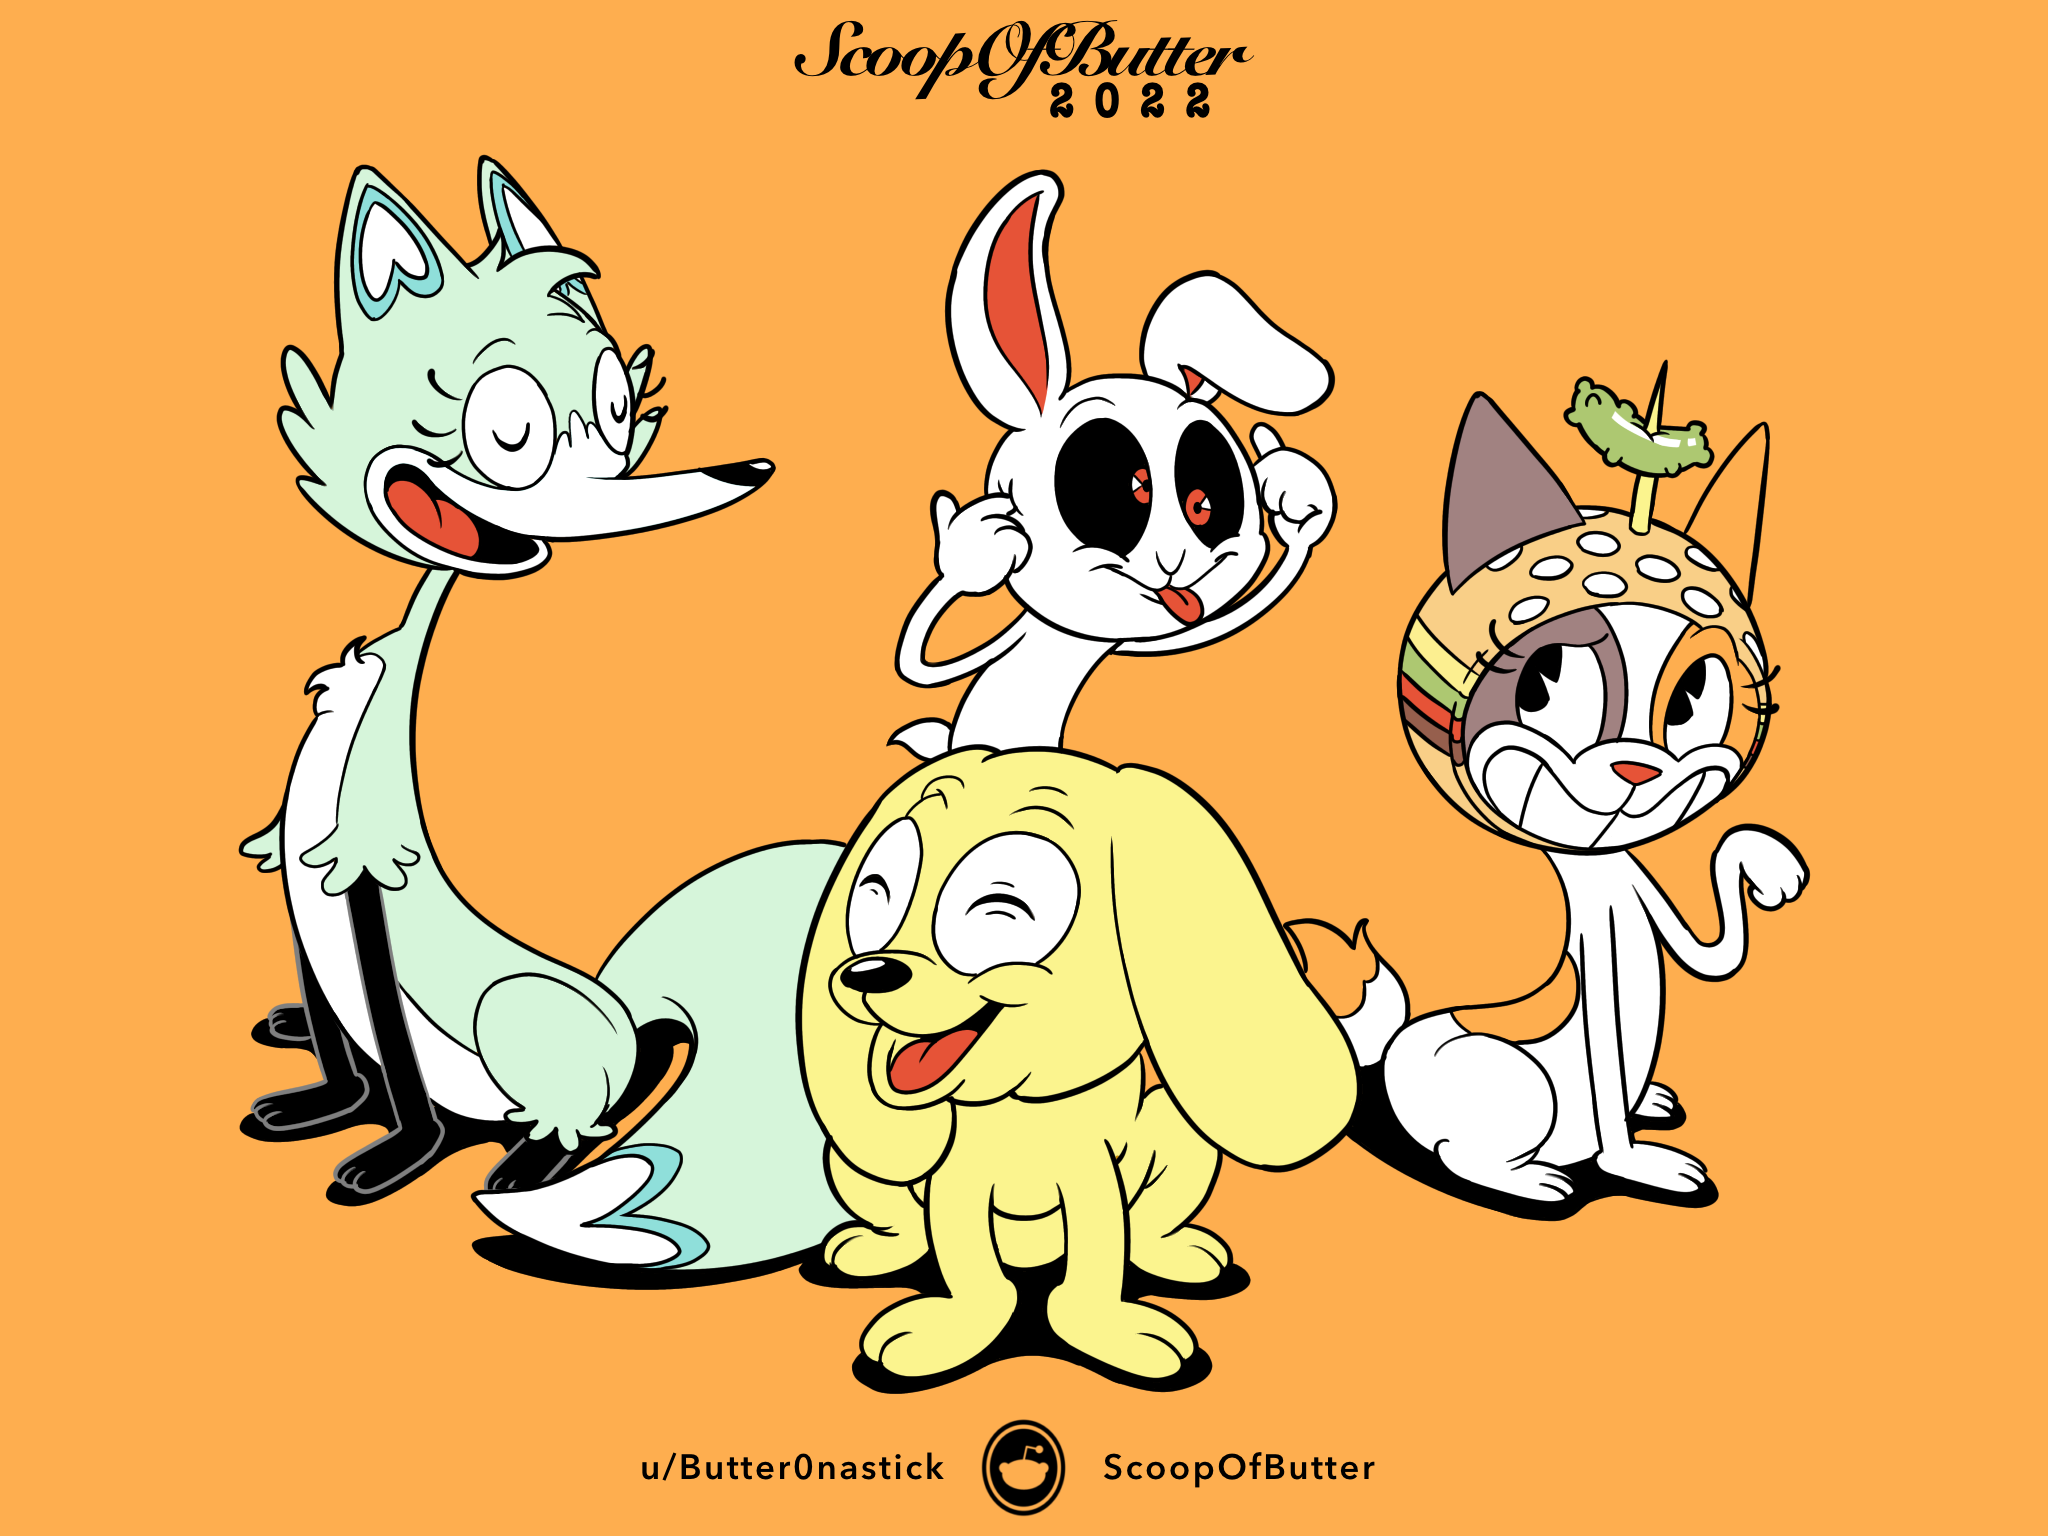 Sum Chikn Nuggit characters drawn in the style of Cuphead!